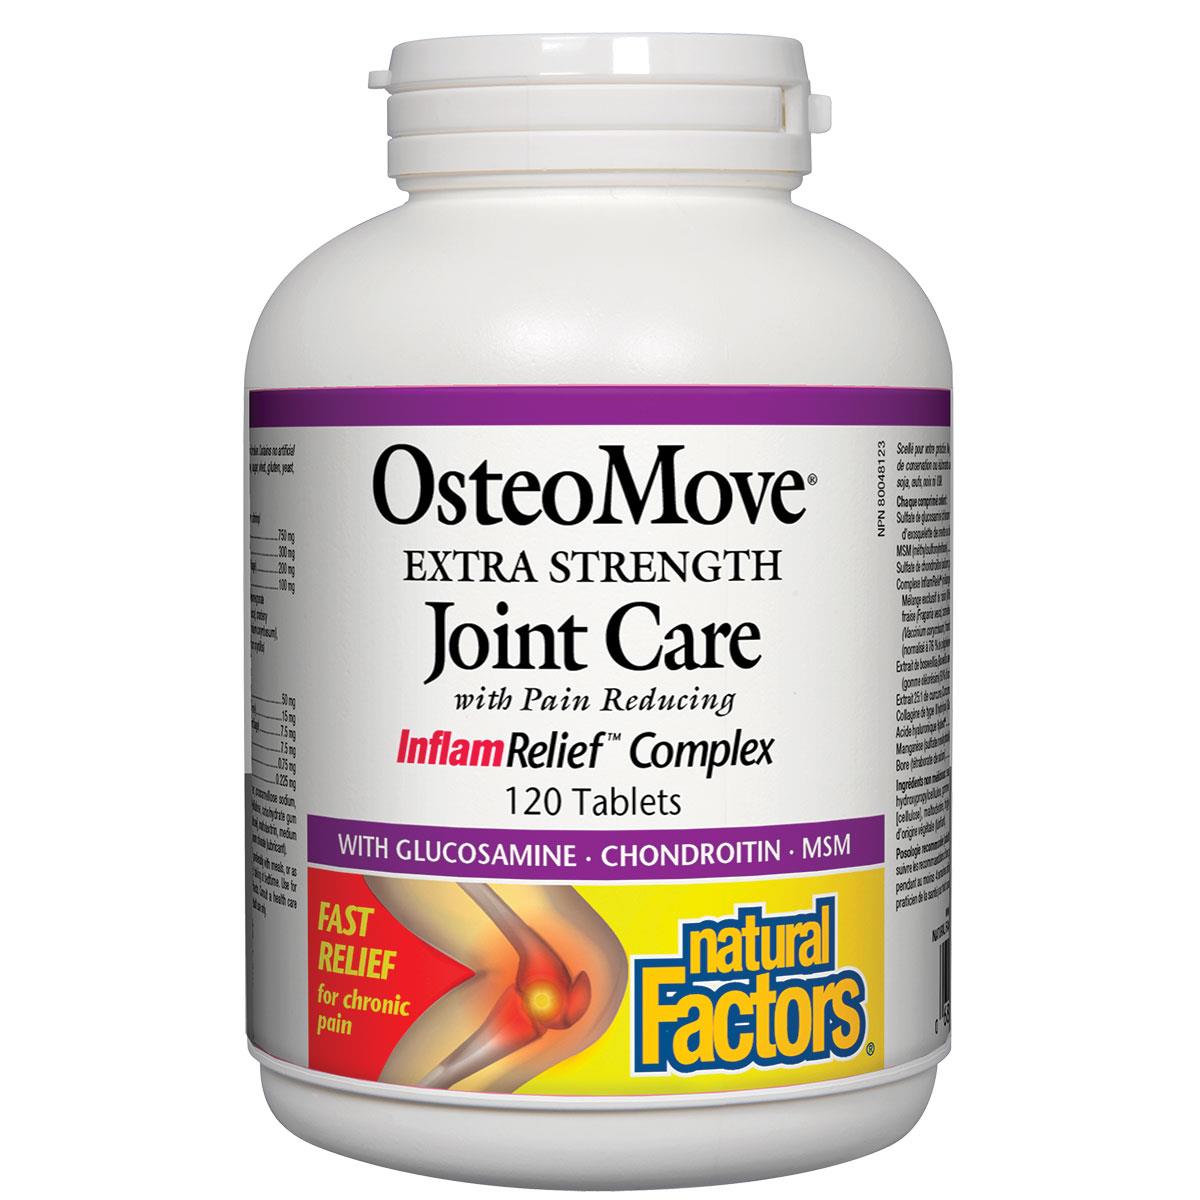 Natural Factors OsteoMove Extra Strength & Fast Acting Joint Care, 120Tabs